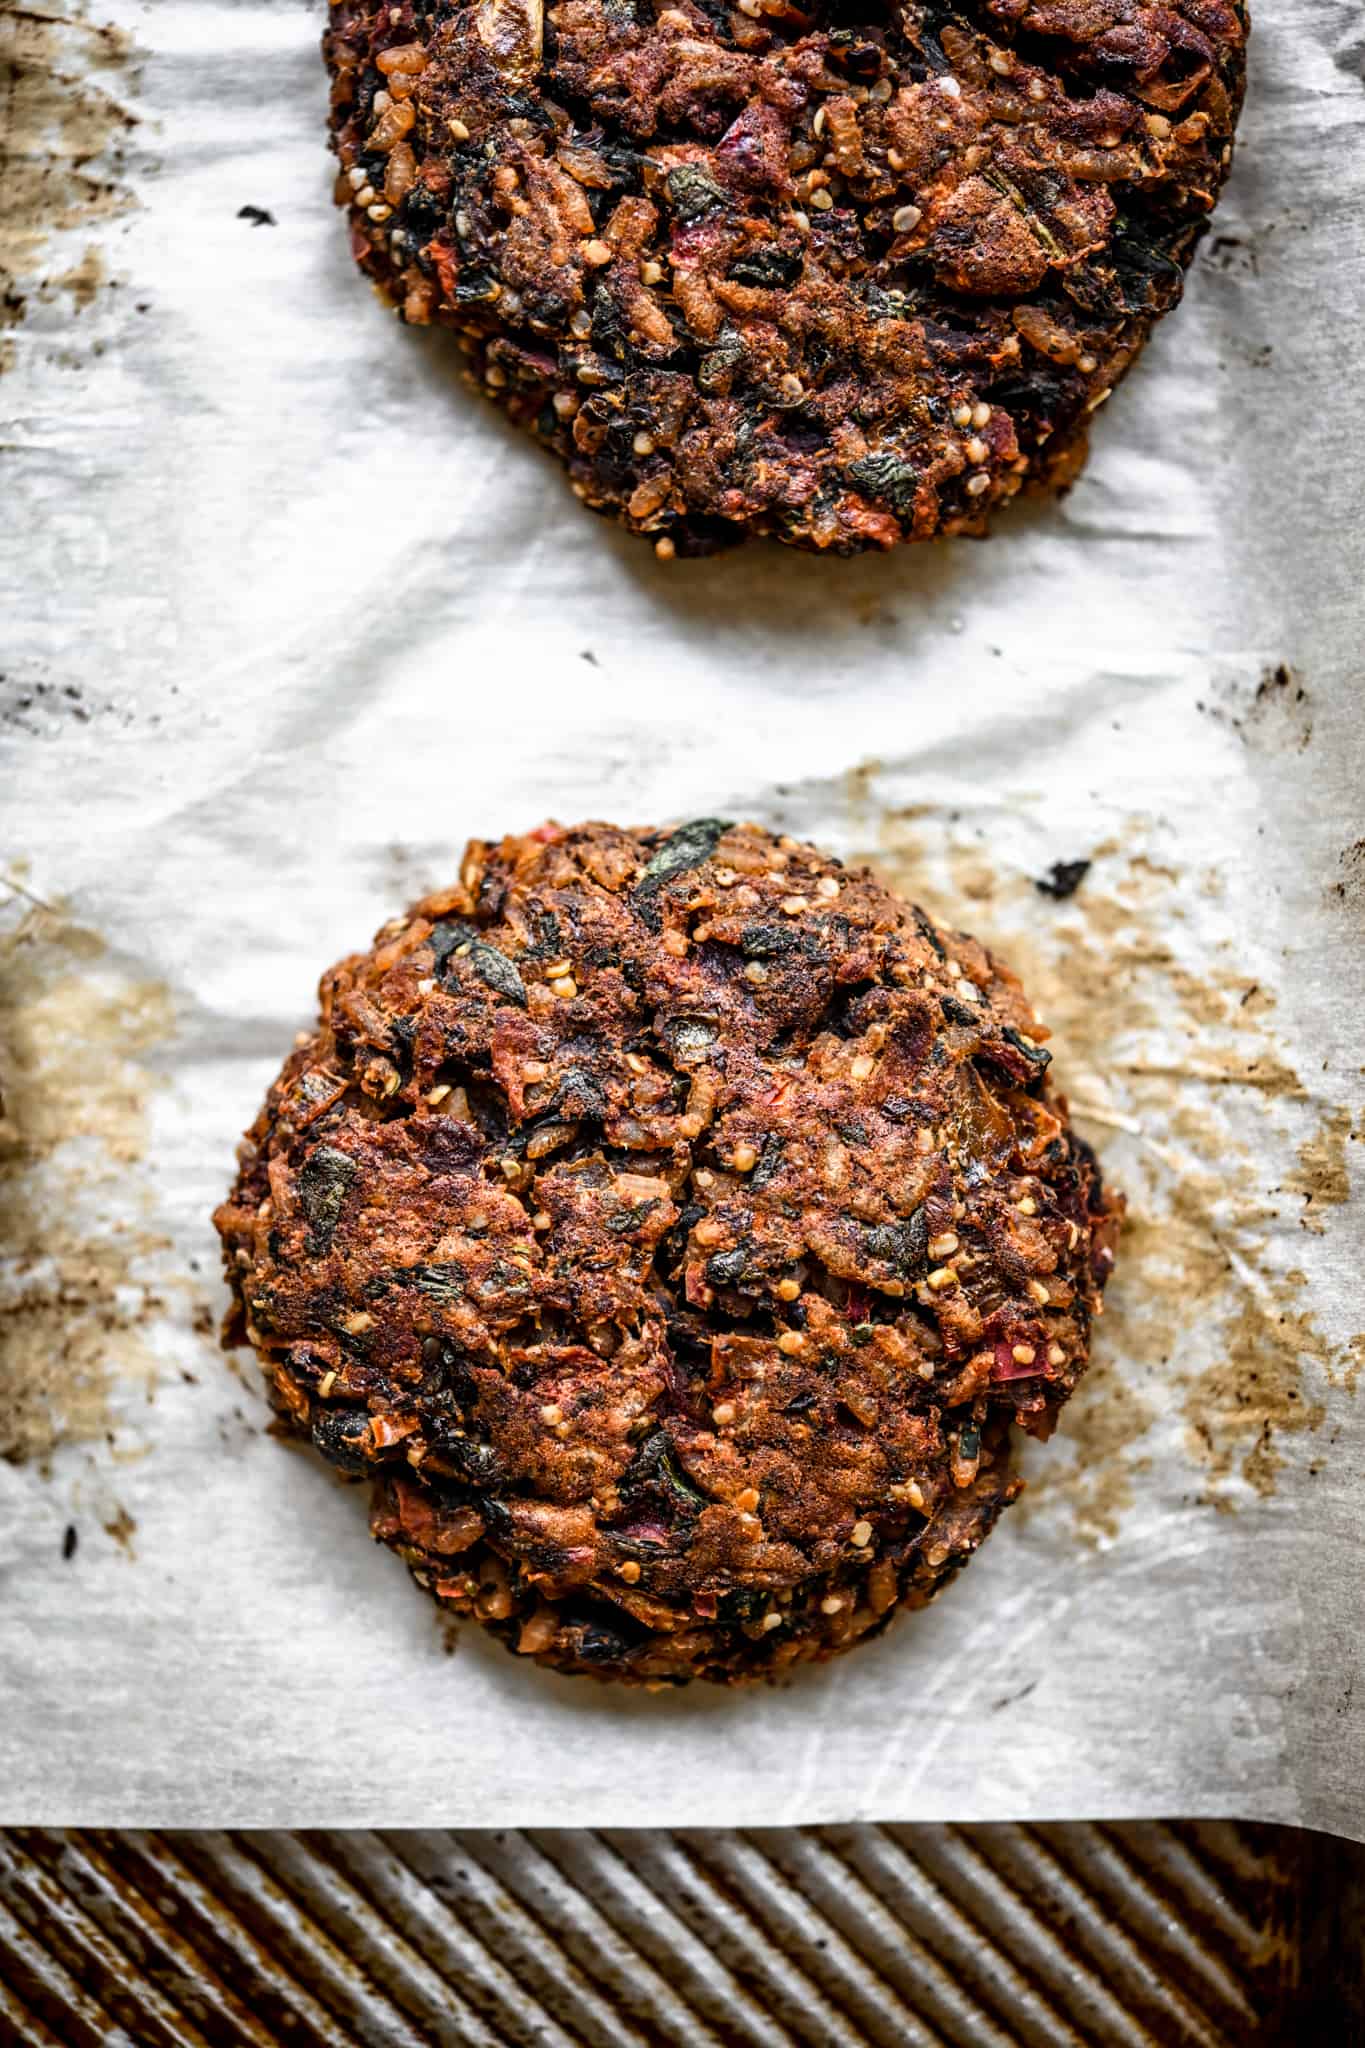 Overhead view of a cooked veggie burger patty on a sheet pan